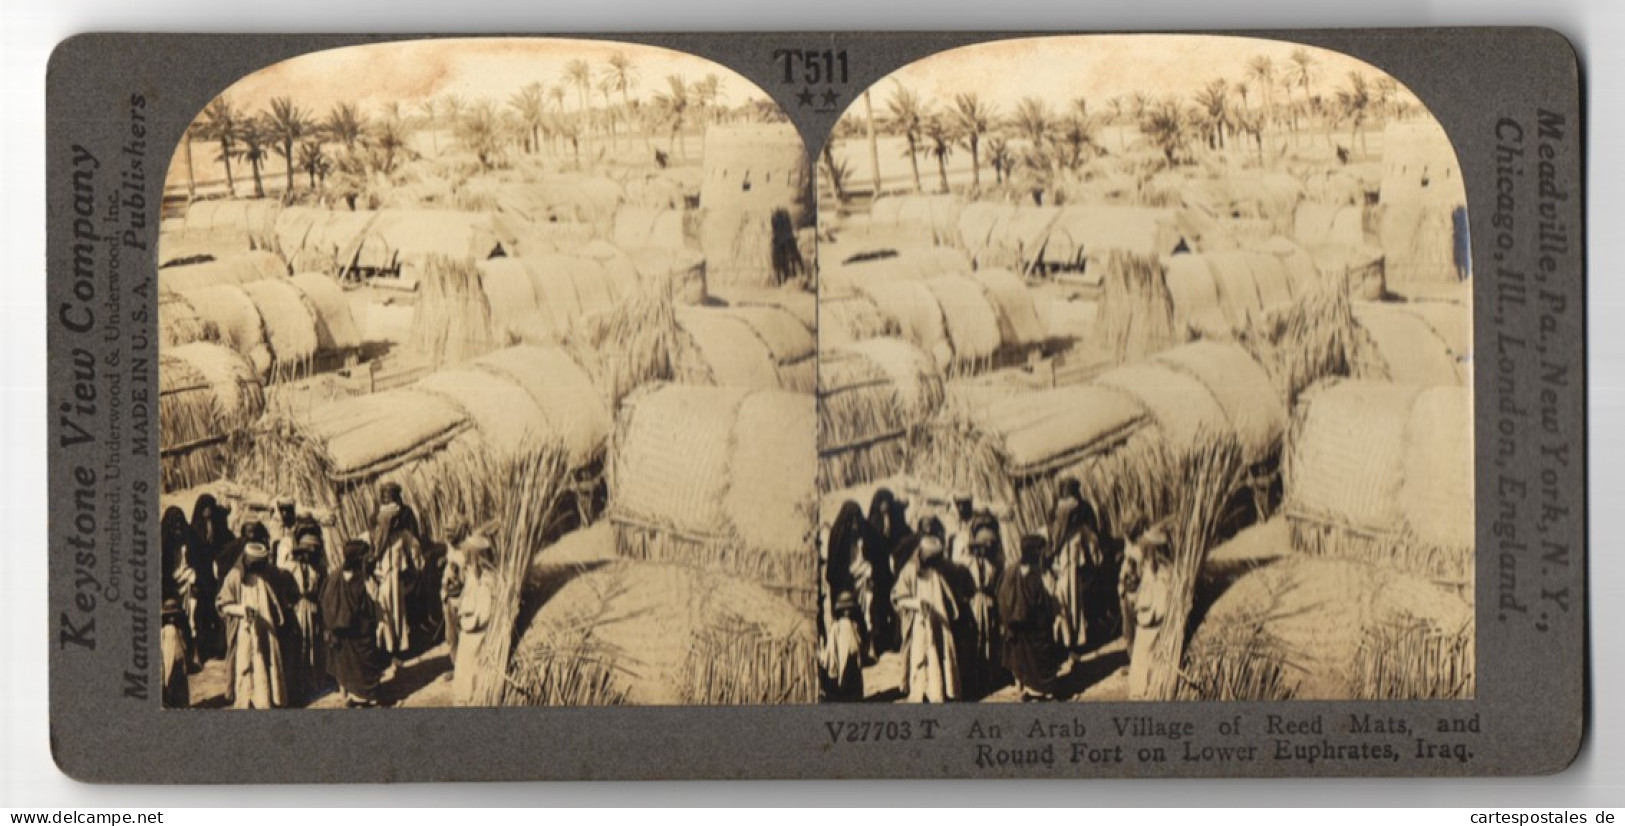 Stereo-Fotografie Keystone View Co., Meadville, Ansicht Iraq, Arab Villag Of Reed Mats And Round Fort On Lower Euphrats  - Stereo-Photographie